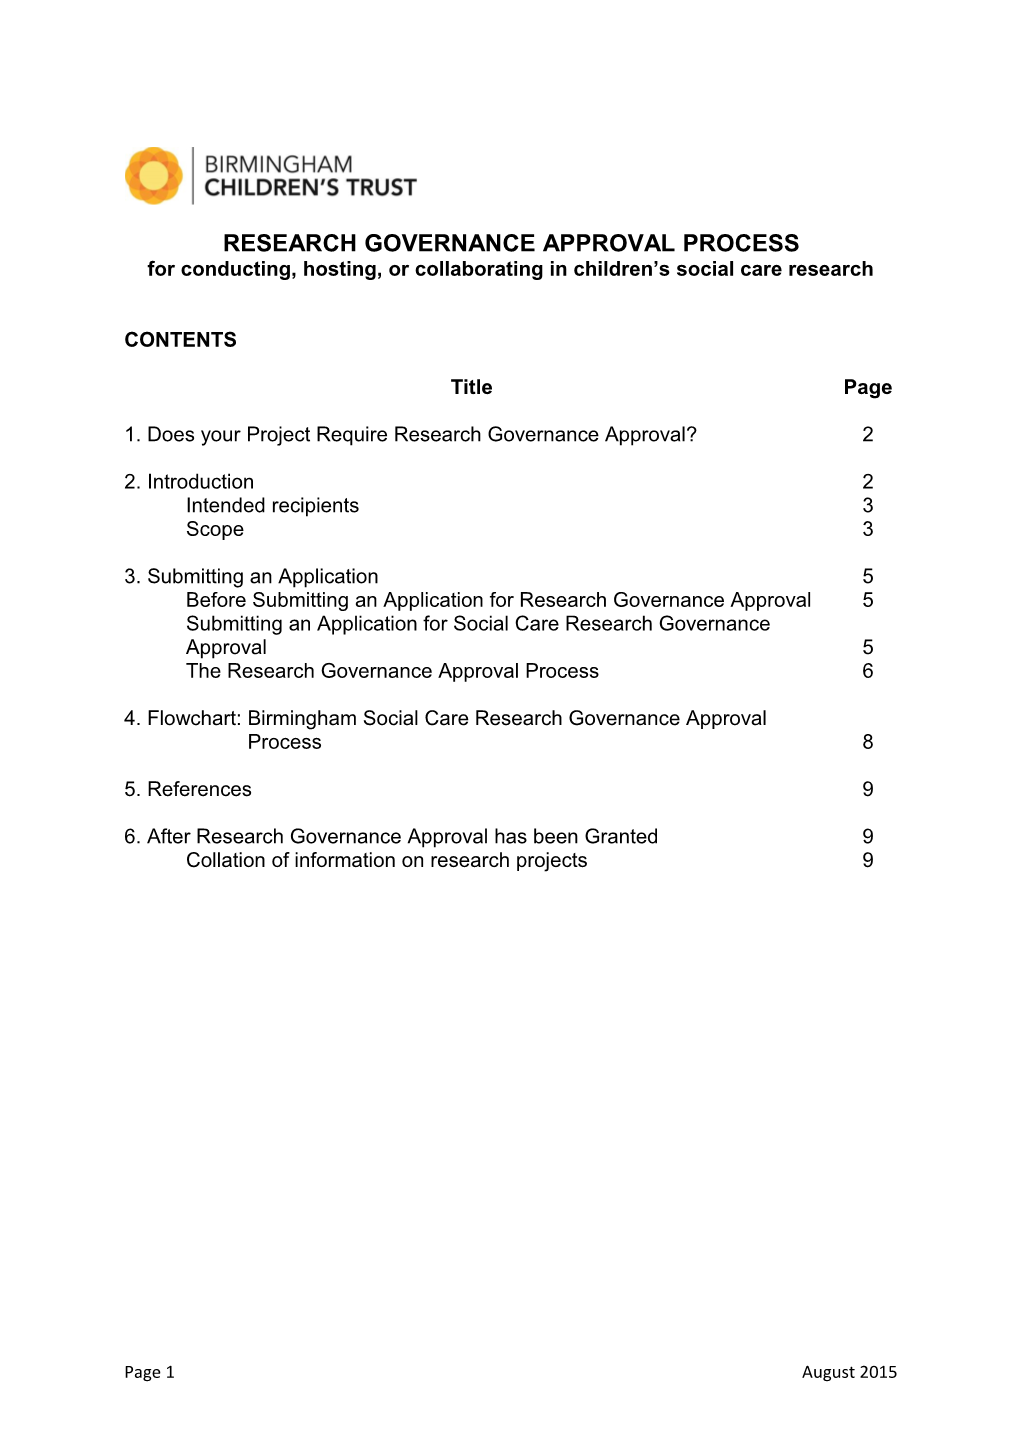 Research Governance Approval Process